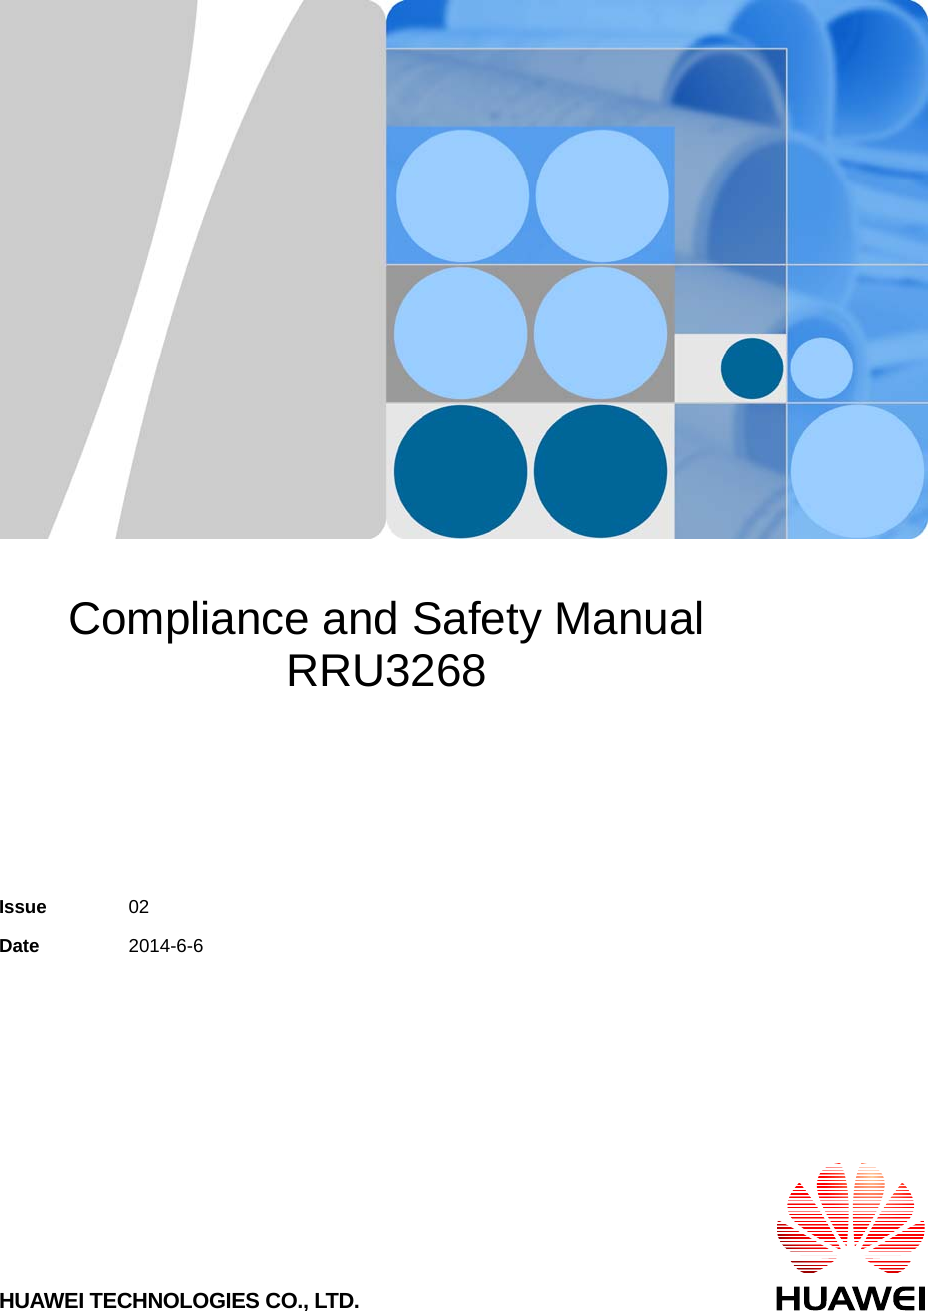       Compliance and Safety Manual RRU3268    Issue  02 Date  2014-6-6 HUAWEI TECHNOLOGIES CO., LTD. 